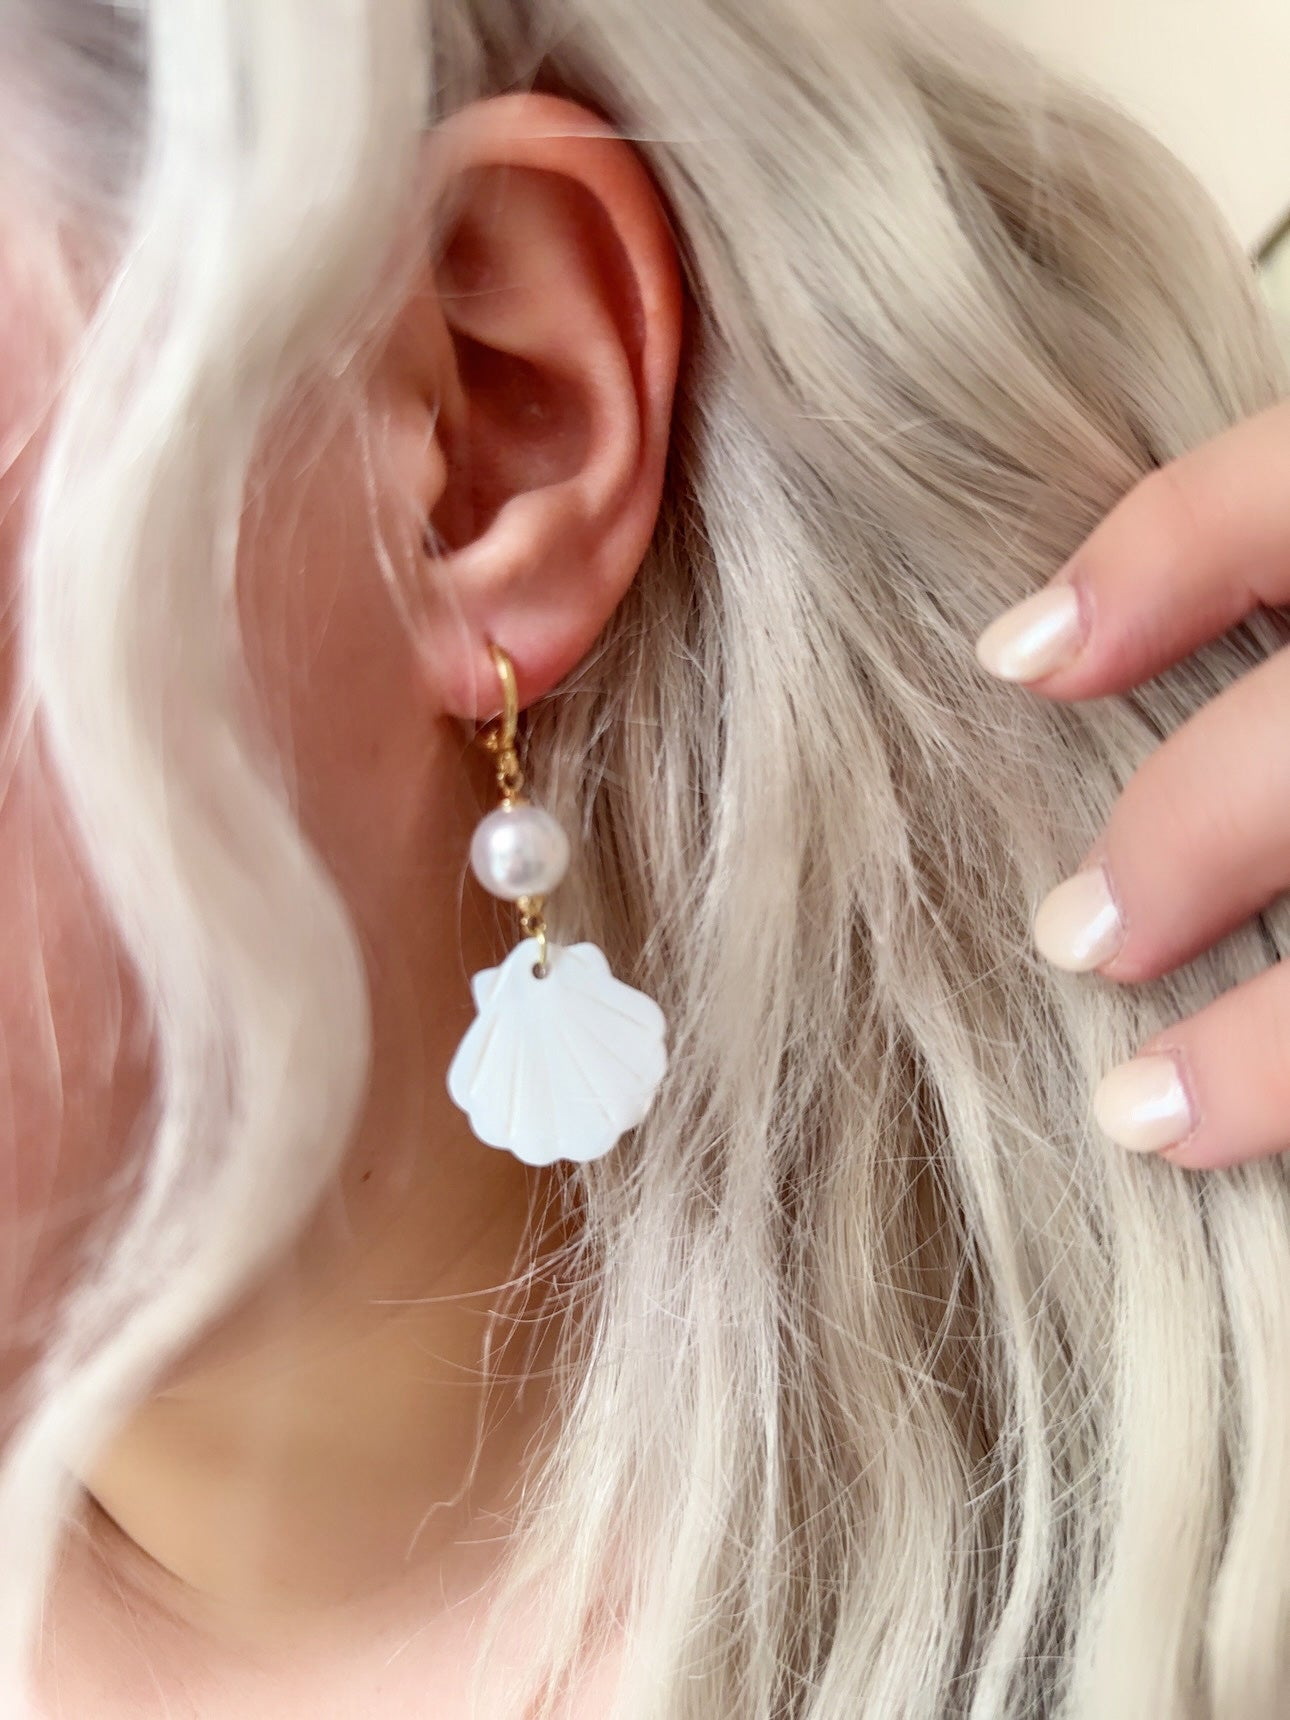 The “Mother Of Pearl” Seashell Earrings